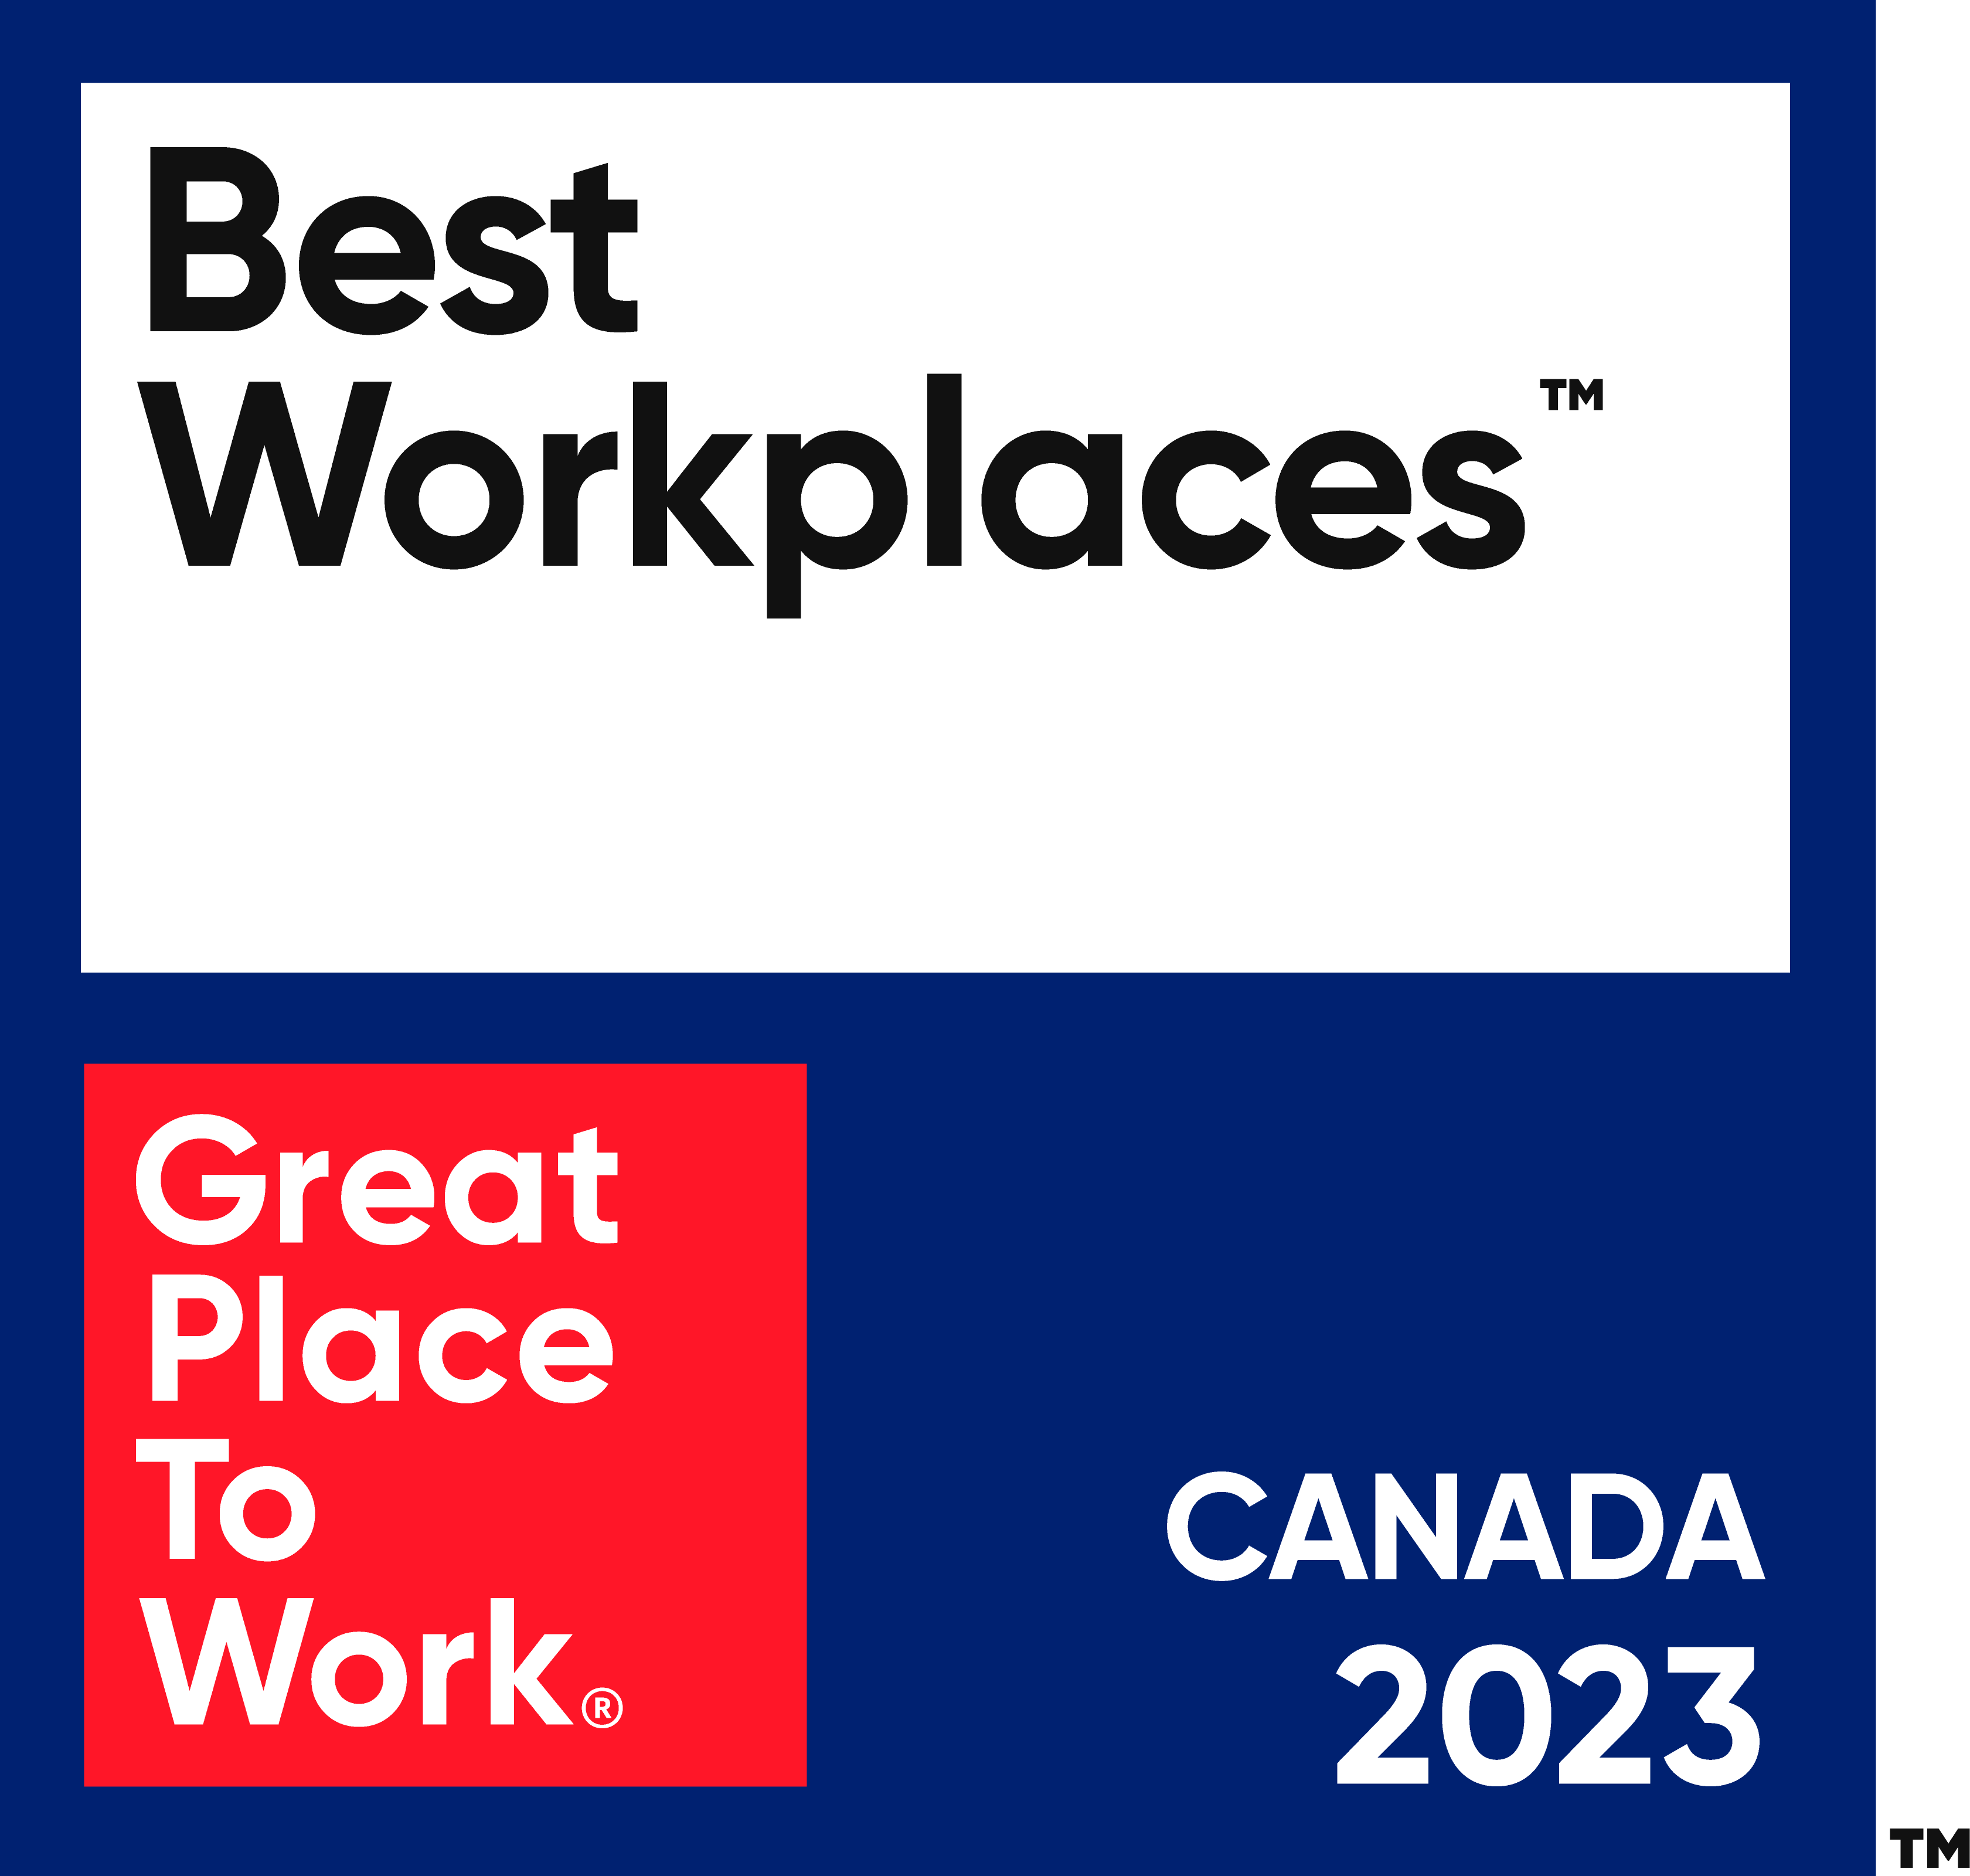 Best Workplaces Canada 2023